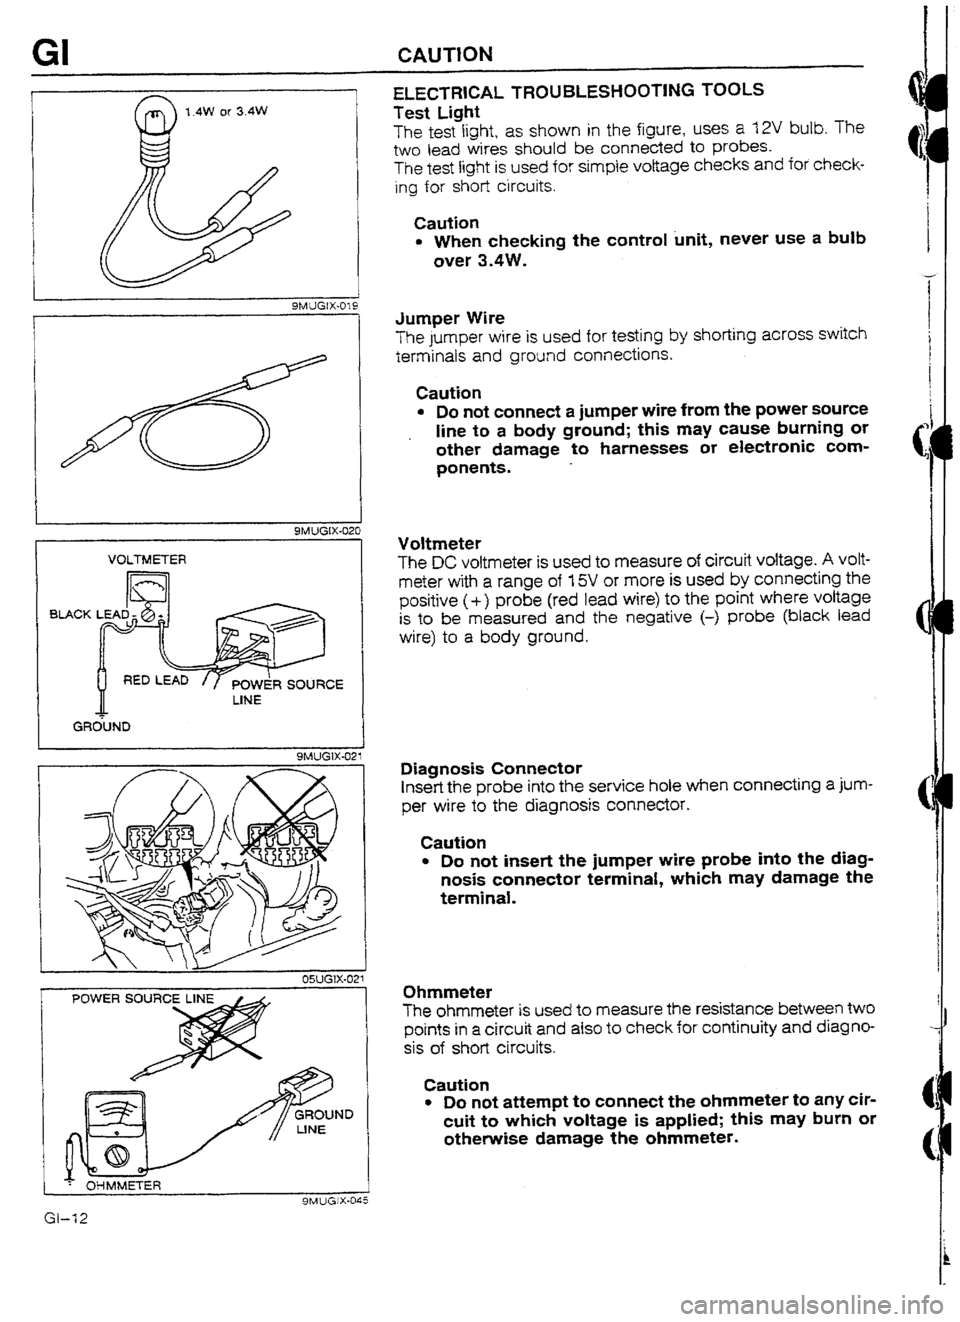 MAZDA 232 1990  Workshop Manual Suplement GI CAUTKN 
SMUGIX-a21 
I VOLTMETER 
1 9MUGlX-021 
POWER SOURC 
ELECTRICAL TROUBLESHOOTING TOOLS 
Test Light 
The test light, as shown in the figure, uses a f2V bulb. The 
two lead wires should be conn